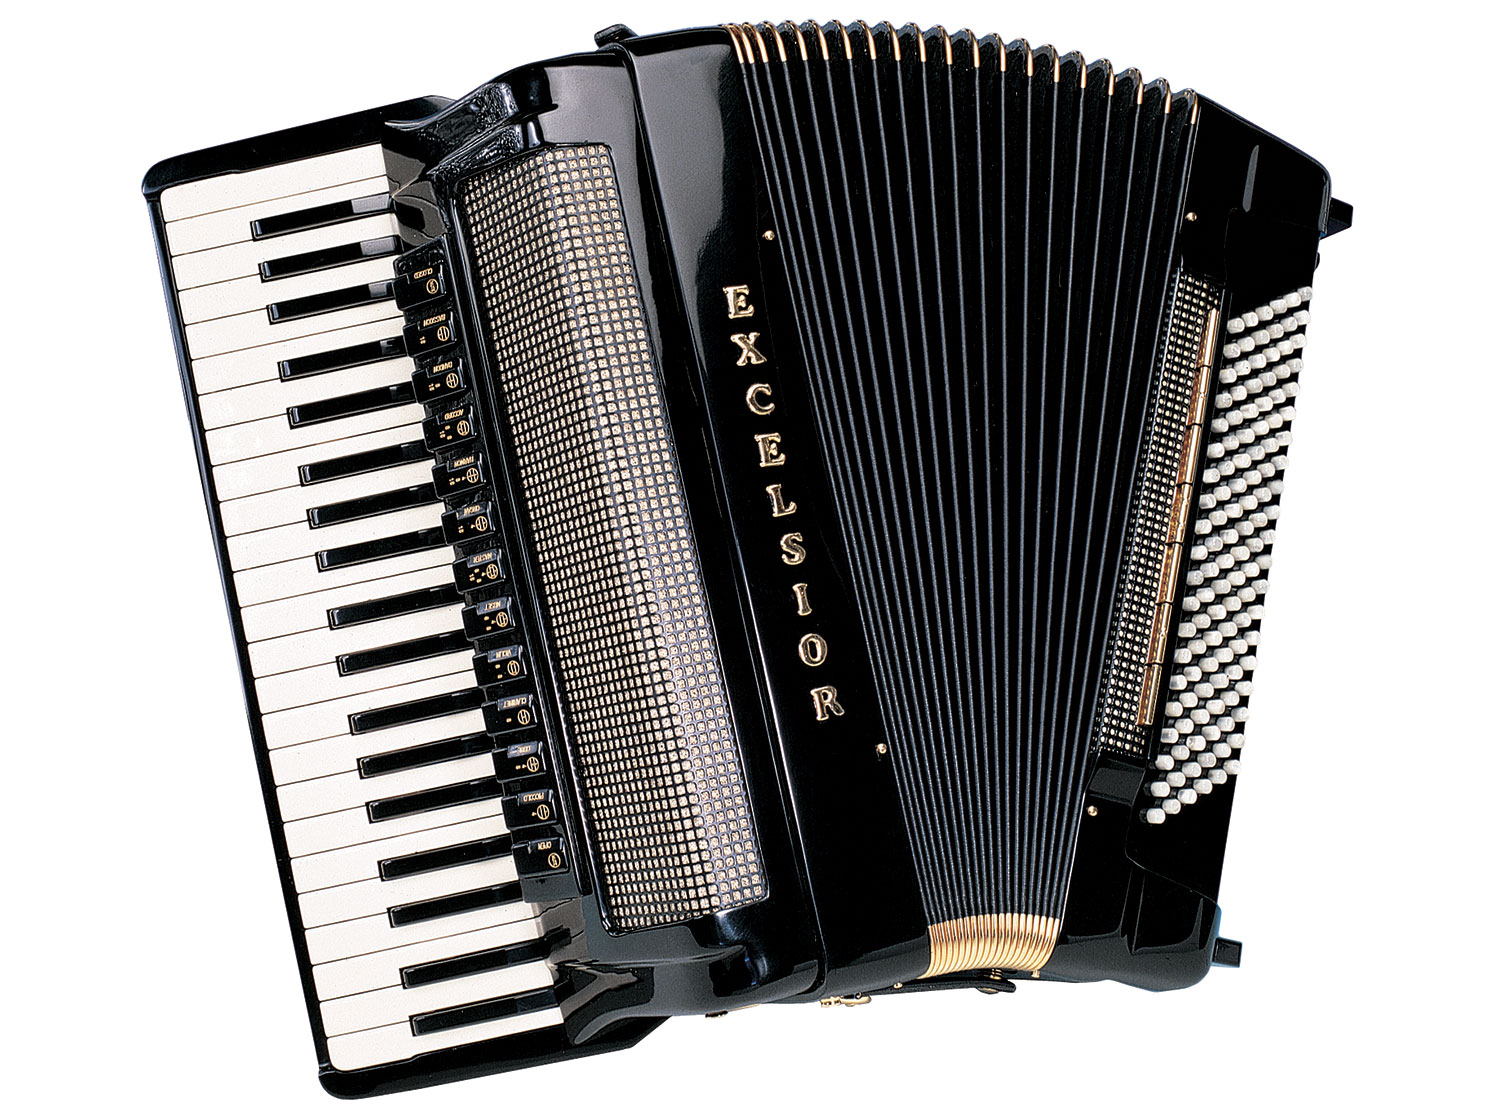 Piano keyboard – Excelsior Accordion